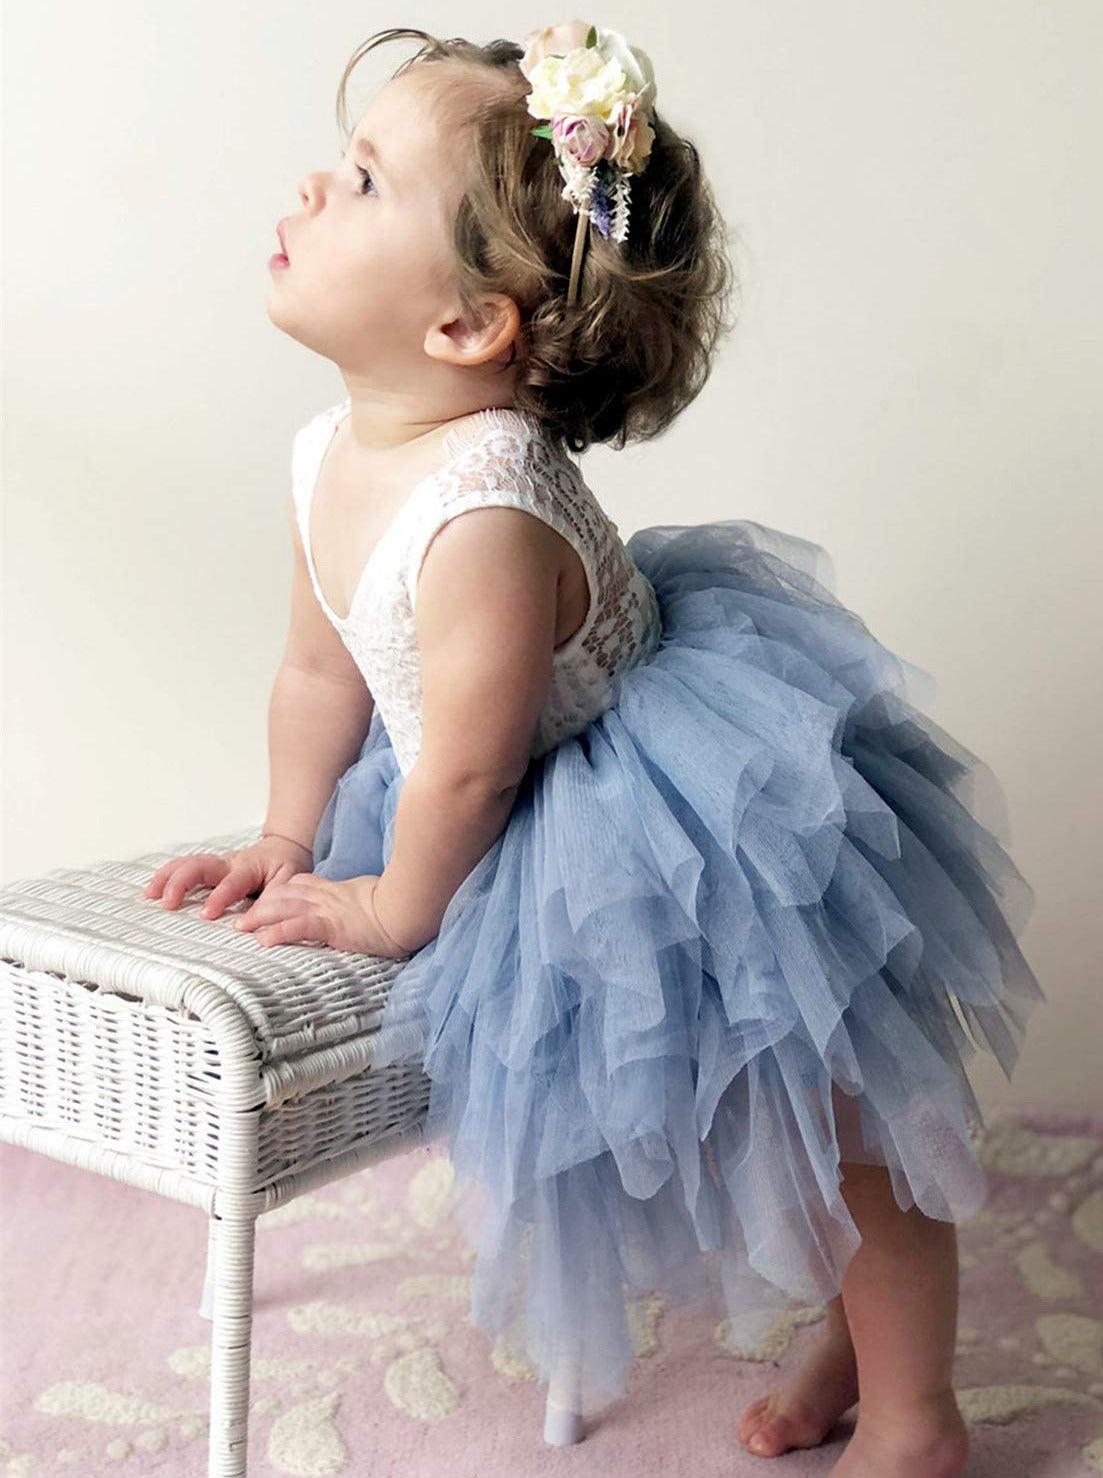 2Bunnies Flower Girl Dress Peony Lace Back A-Line Sleeveless Tiered Tulle Short (Bluish Gray) - 2BUNNIES